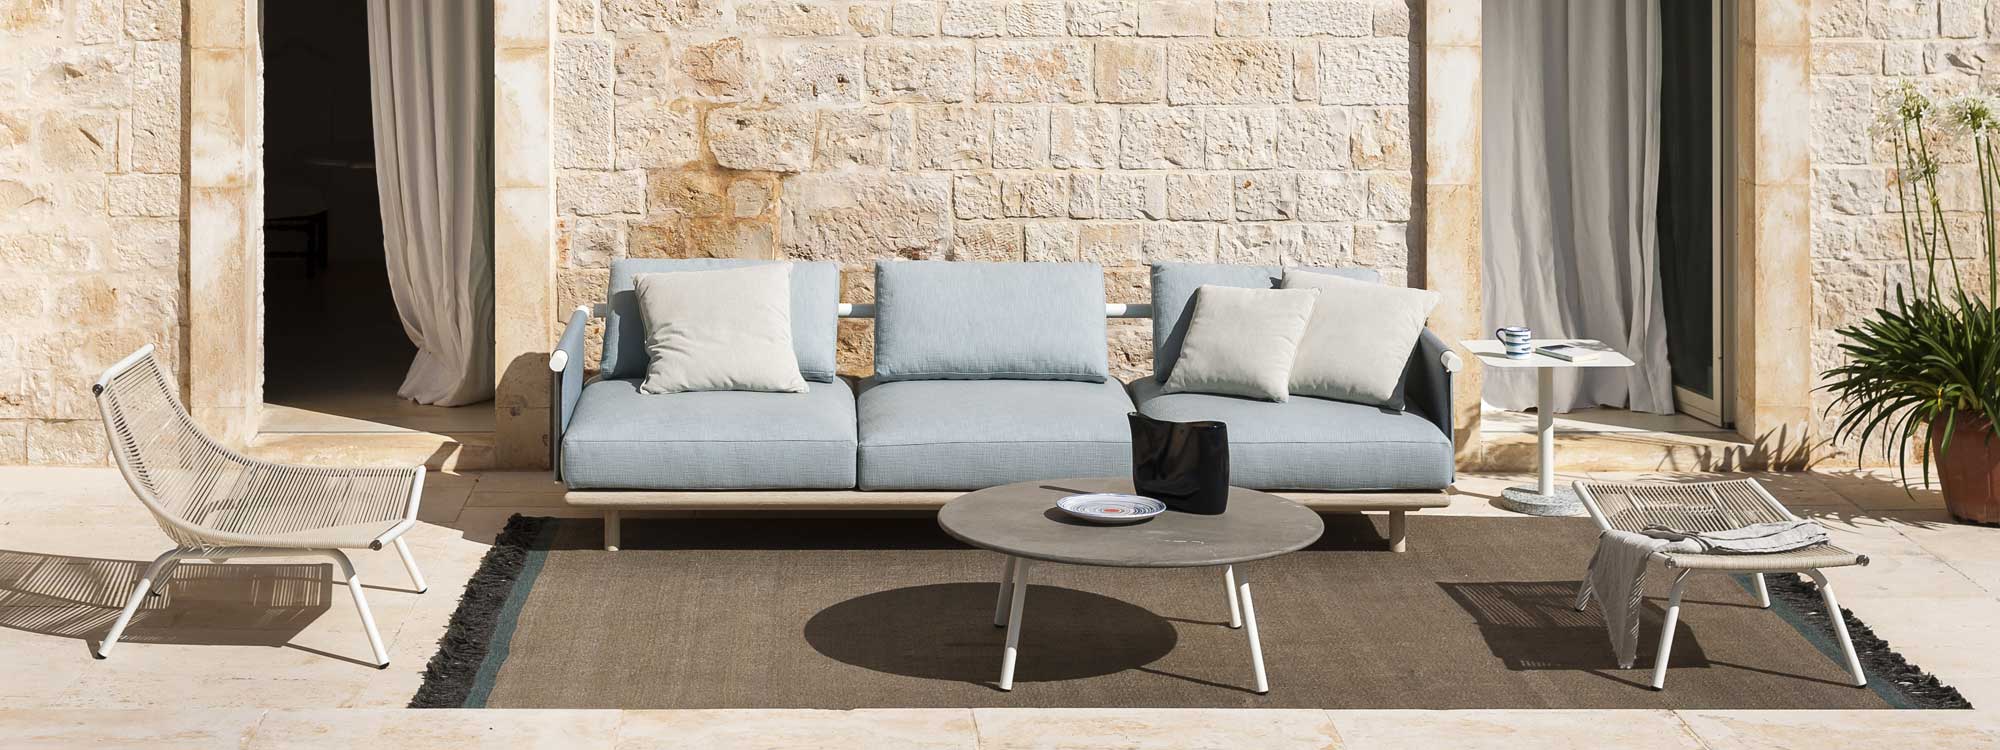 Image of Eden modern garden sofa with oiled white teak base and light blue cushions, with Laze minimalist low chair and foot rest and Piper stone low table by RODA